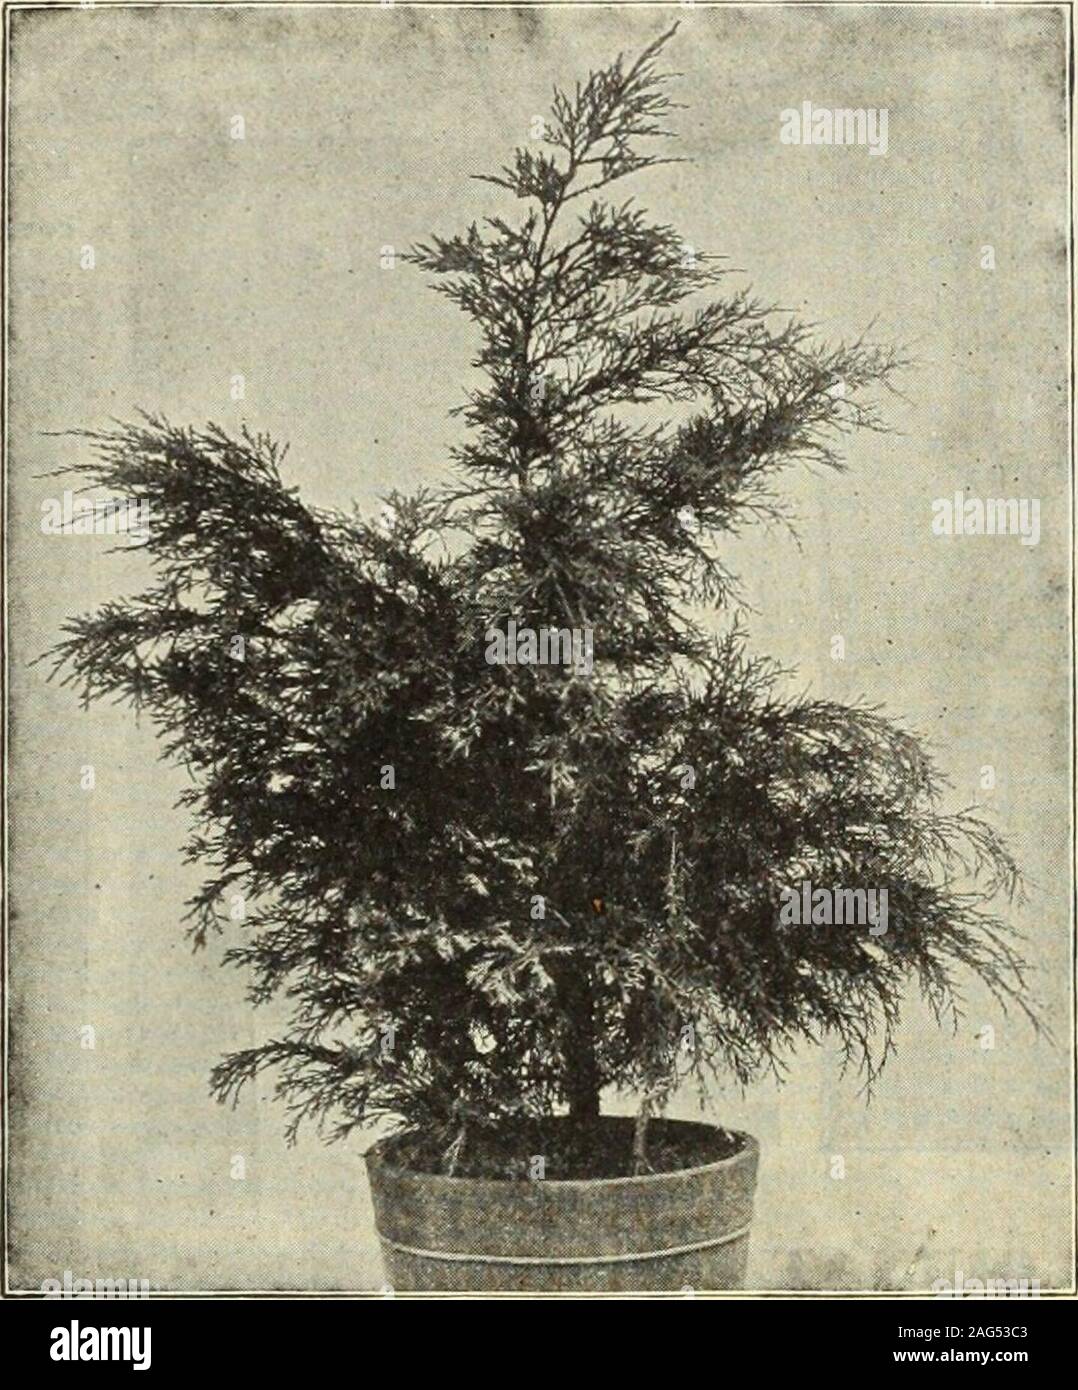 . Dreer's 1913 garden book. ich dark green.Plants, 2* feet high, $2.00 each.RetinisporaFilifera.(l1hread-bran cited Japanese Cypress). Of very graceful outline,with bright green foliage,particularly handsome on ac-count of the ends of its shootsdrooping in long filaments.Plants, 3£ feet high, $3.00each. Retinispora Filifera Au-rea. Similar to the pre-ceding, but a dwarf grower,with the foliage beautifullytipped with golden yellow.Very rare. Plants, 1J feethigh, $2.50 each. Retinispora Pisifera Au°rea. A bright golden ever-green, open but graceful styleof growth, one of the best,holding its col Stock Photo